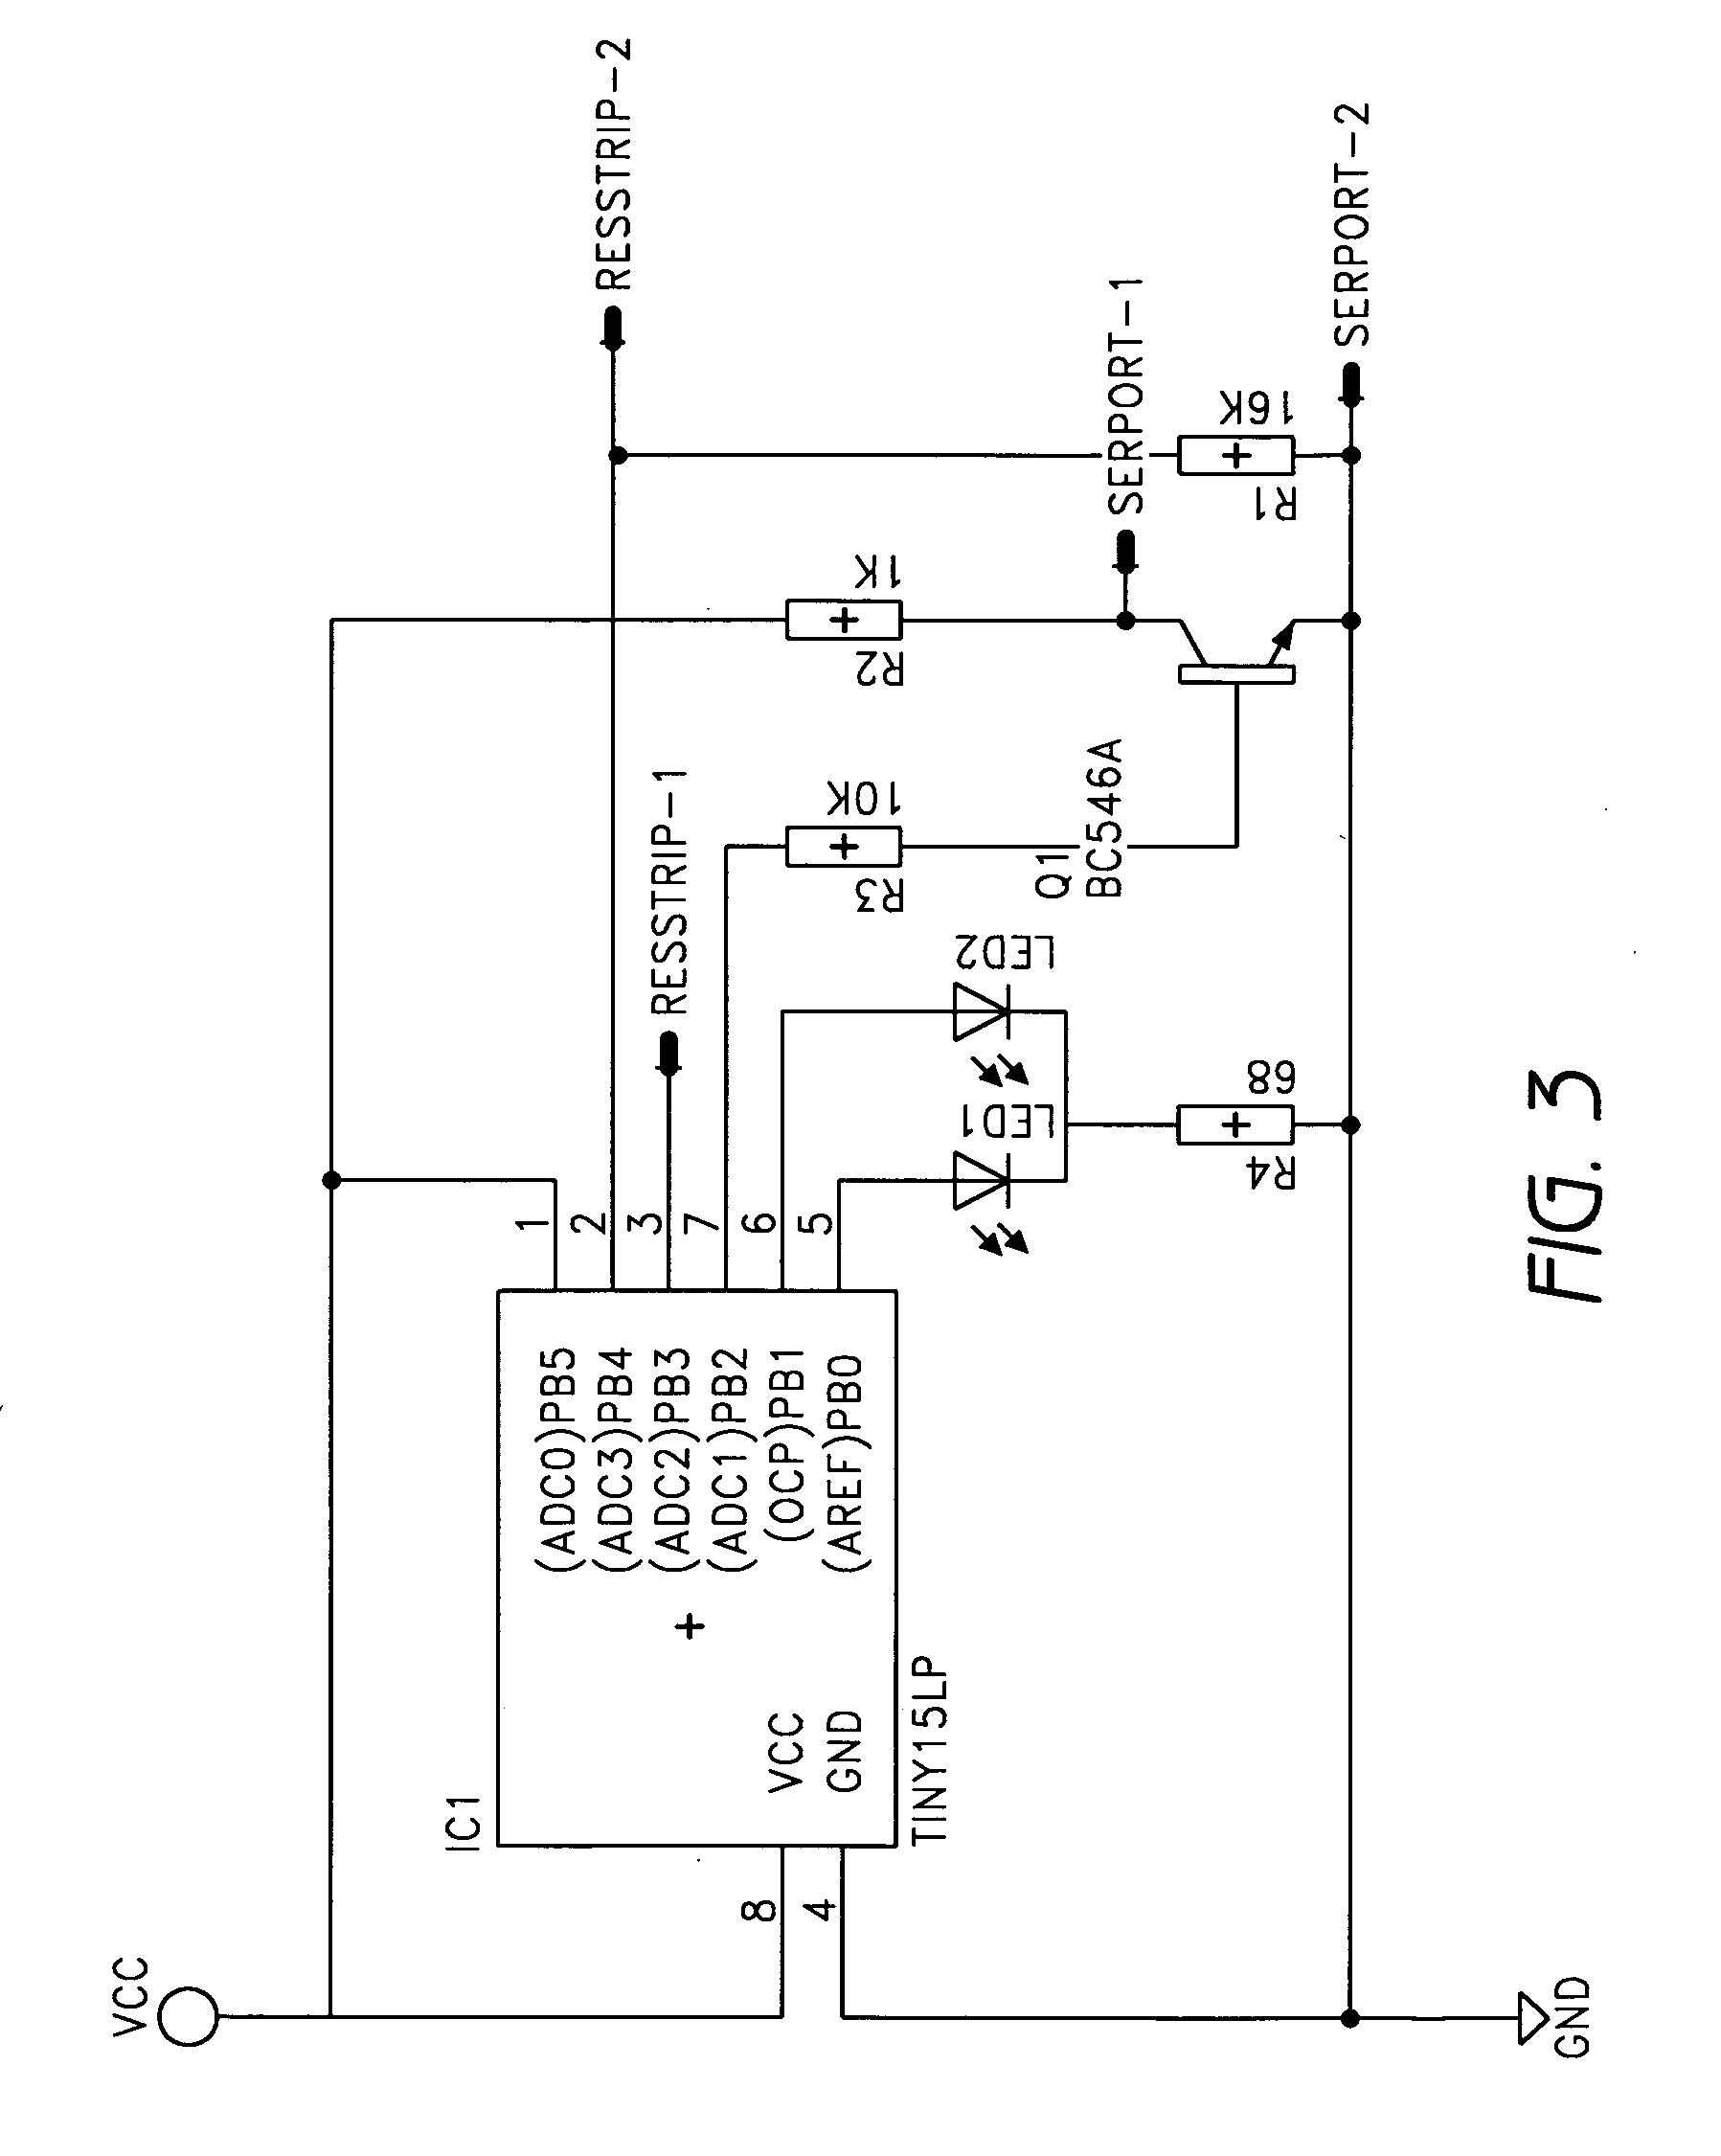 Sensing systems and methods for monitoring gait dynamics